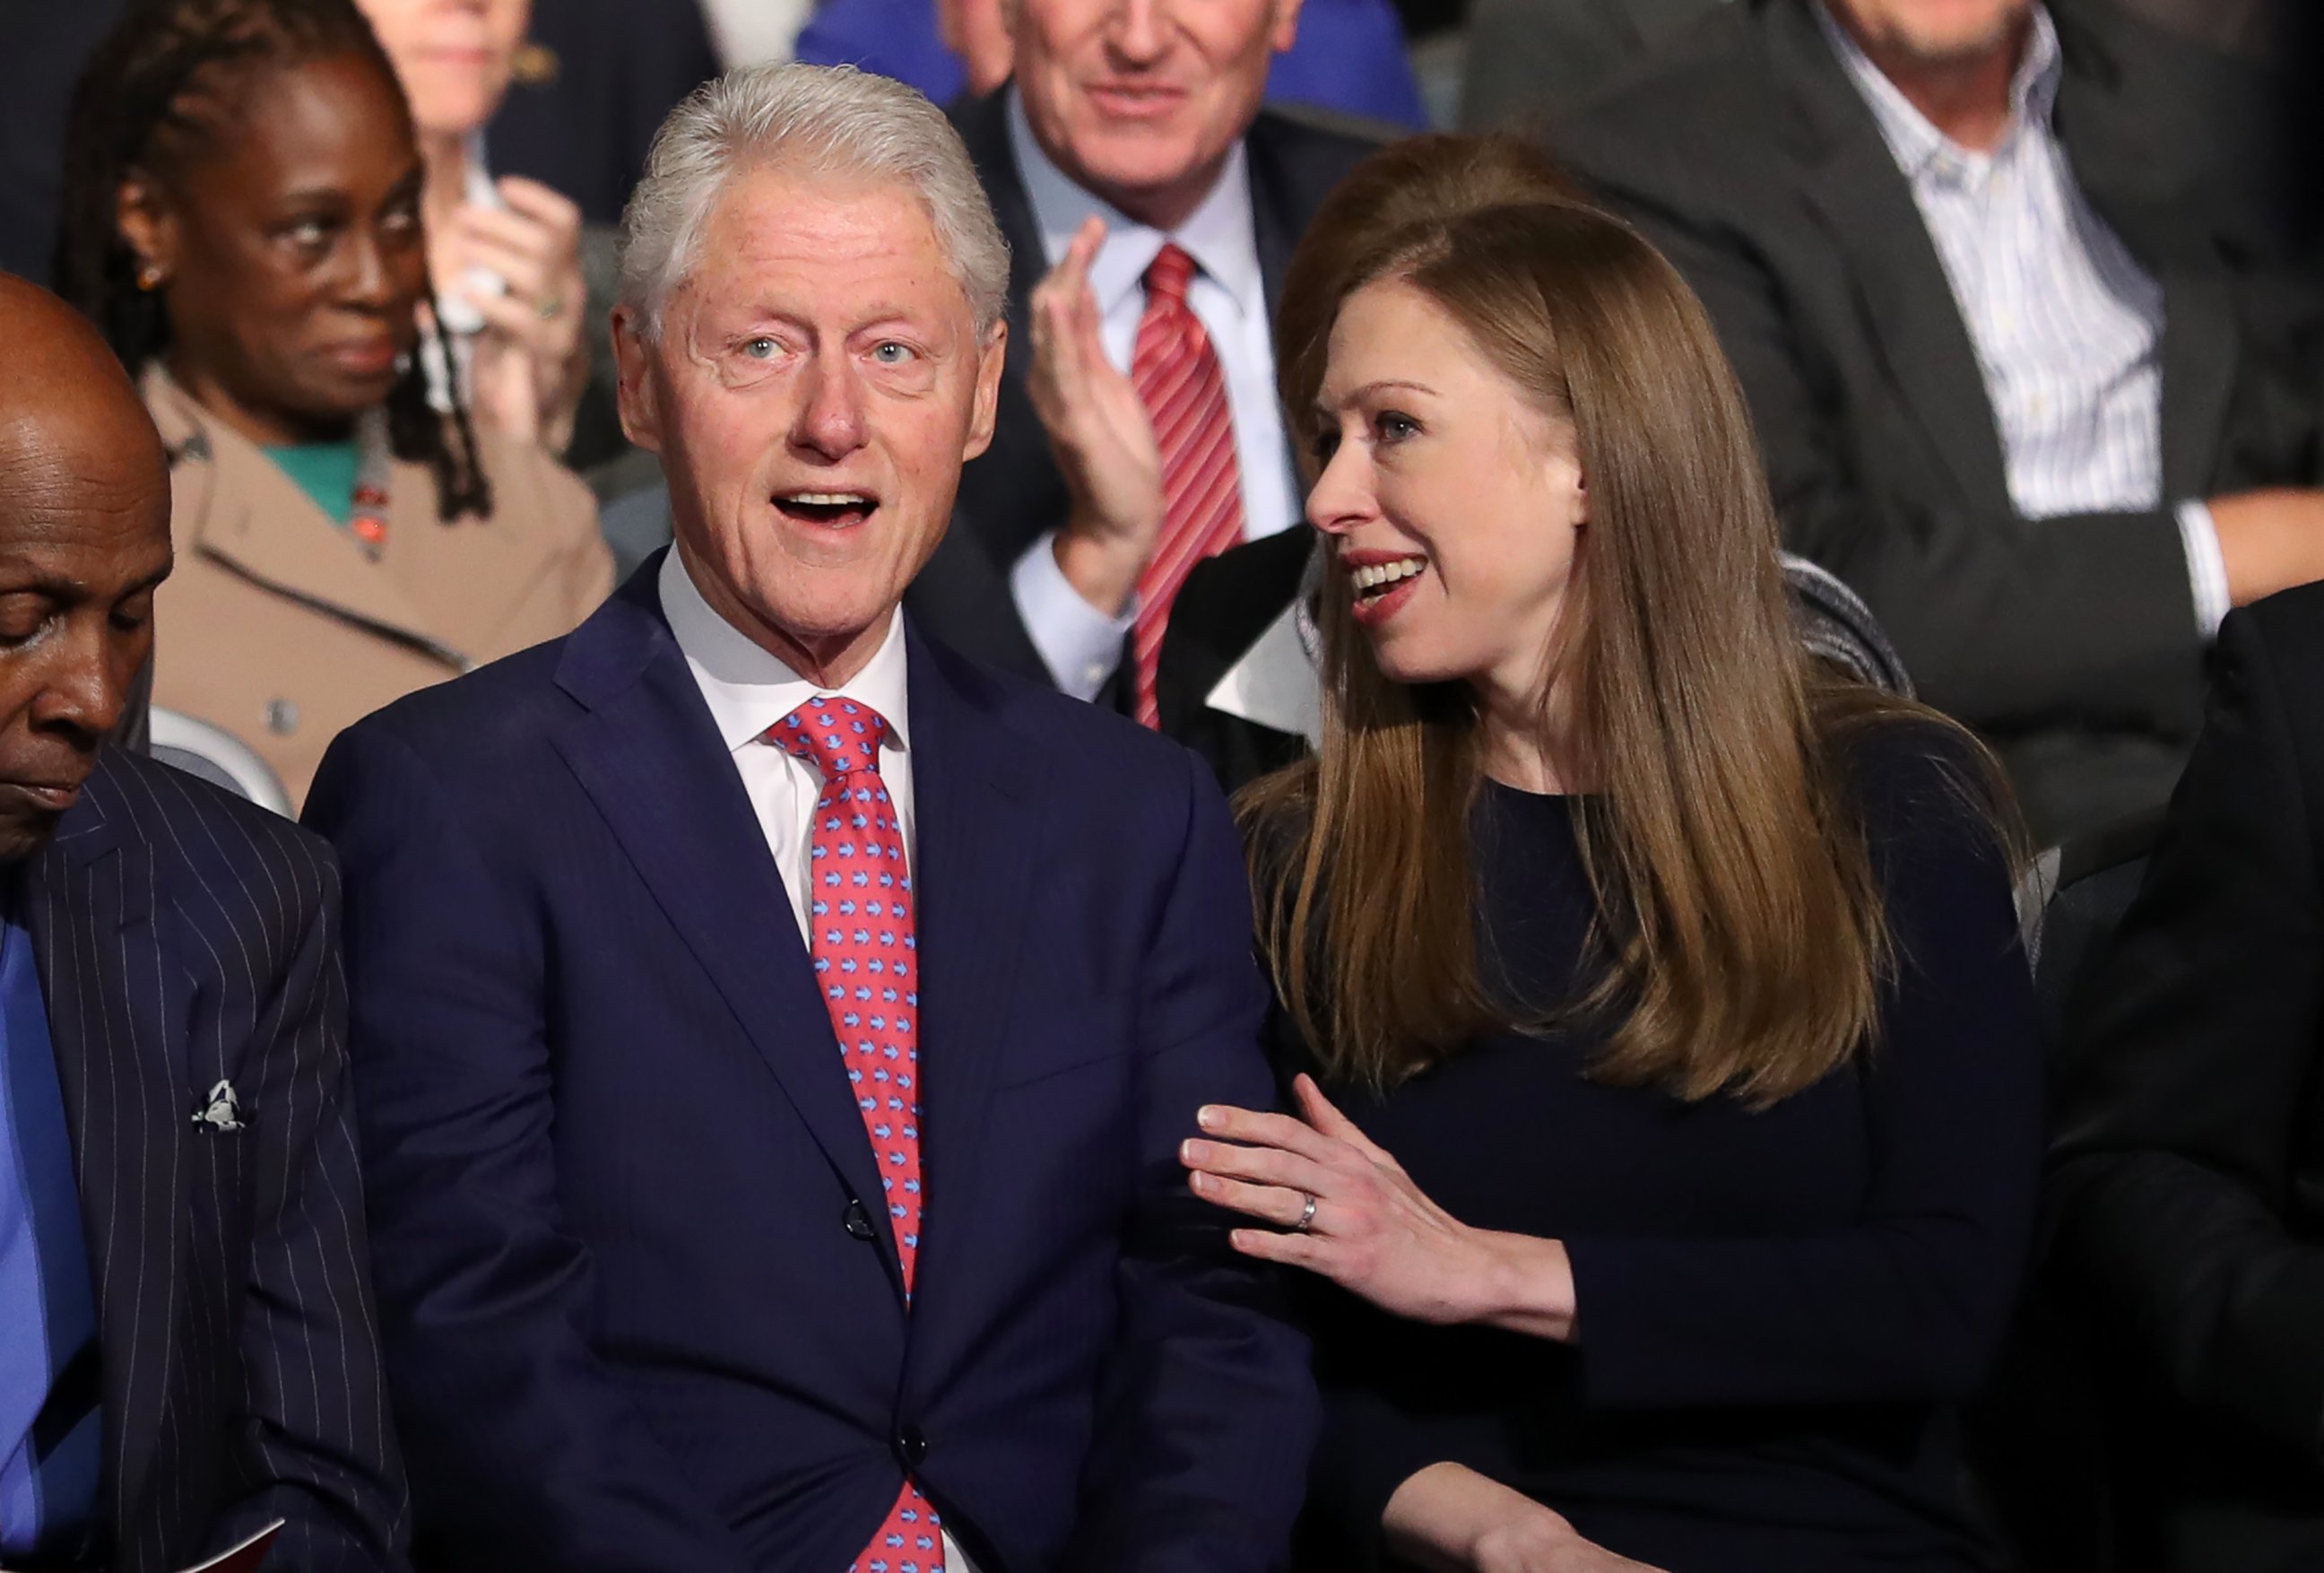 PHOTO: Bill and Chelsea Clinton are seen during the first presidential debate at Hofstra University in Hempstead, New York, Sept. 26, 2016.